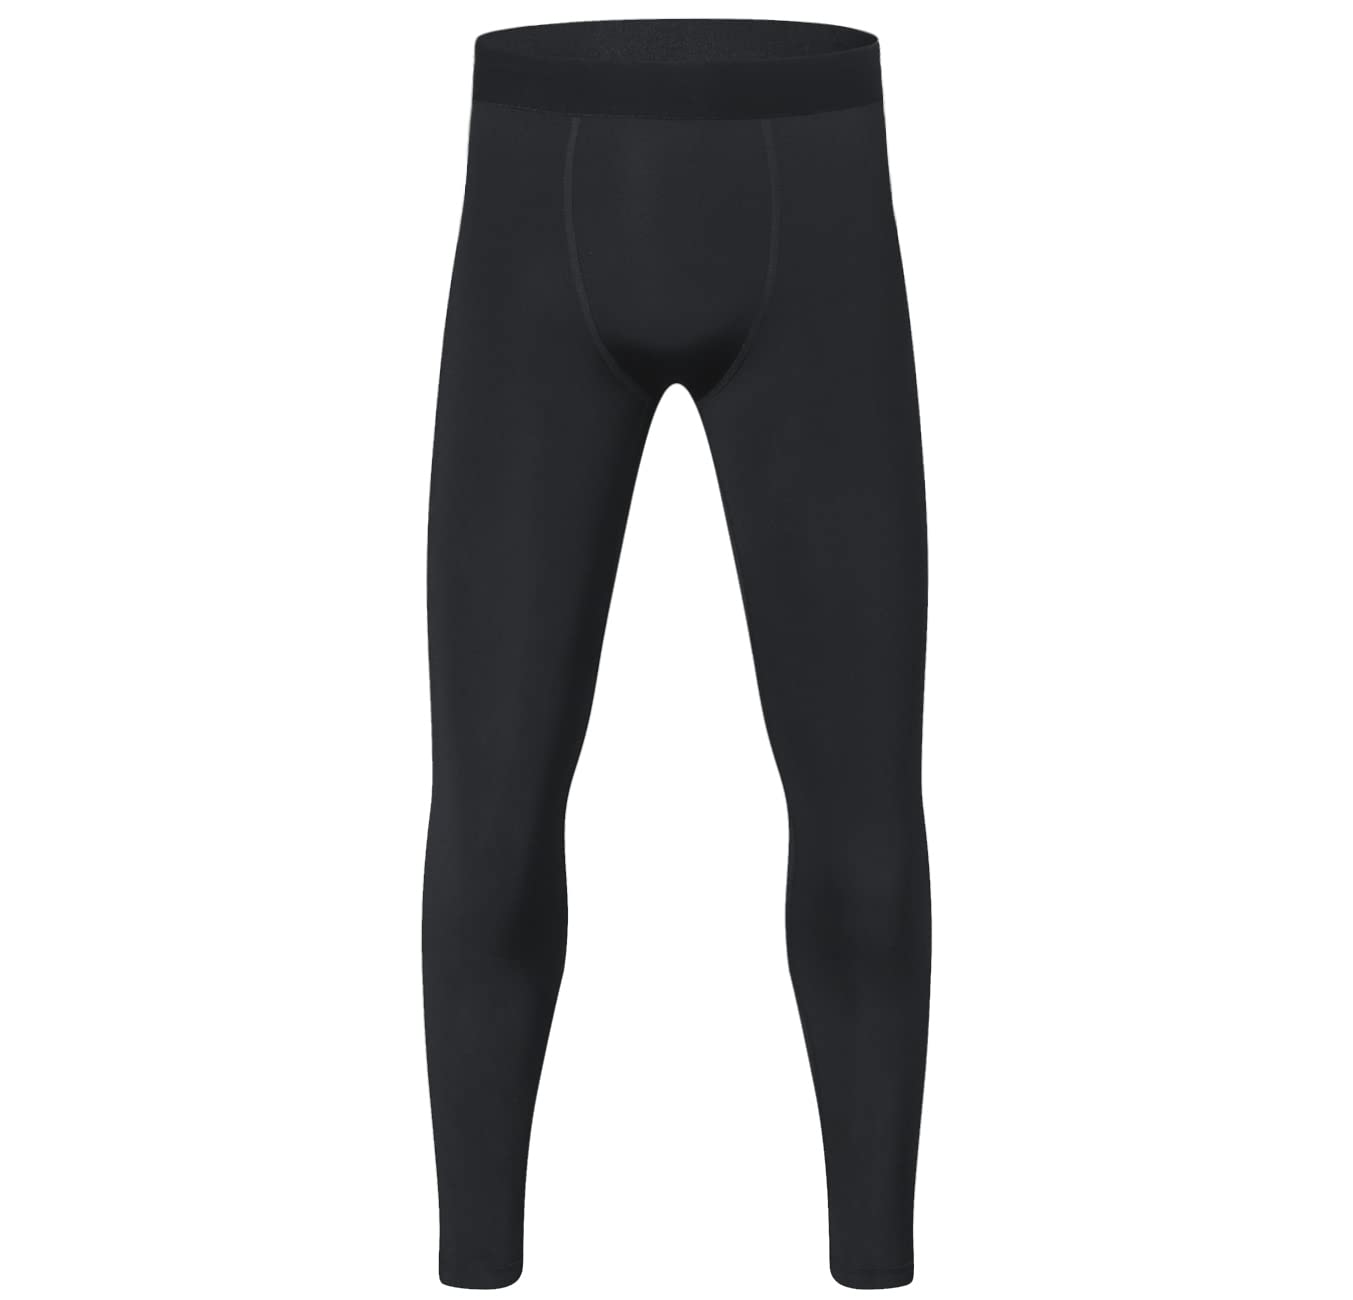 HOPLYNN Youth Boys' Compression Pants Leggings Baselayer Tights Leggings Sports Youth for Kids